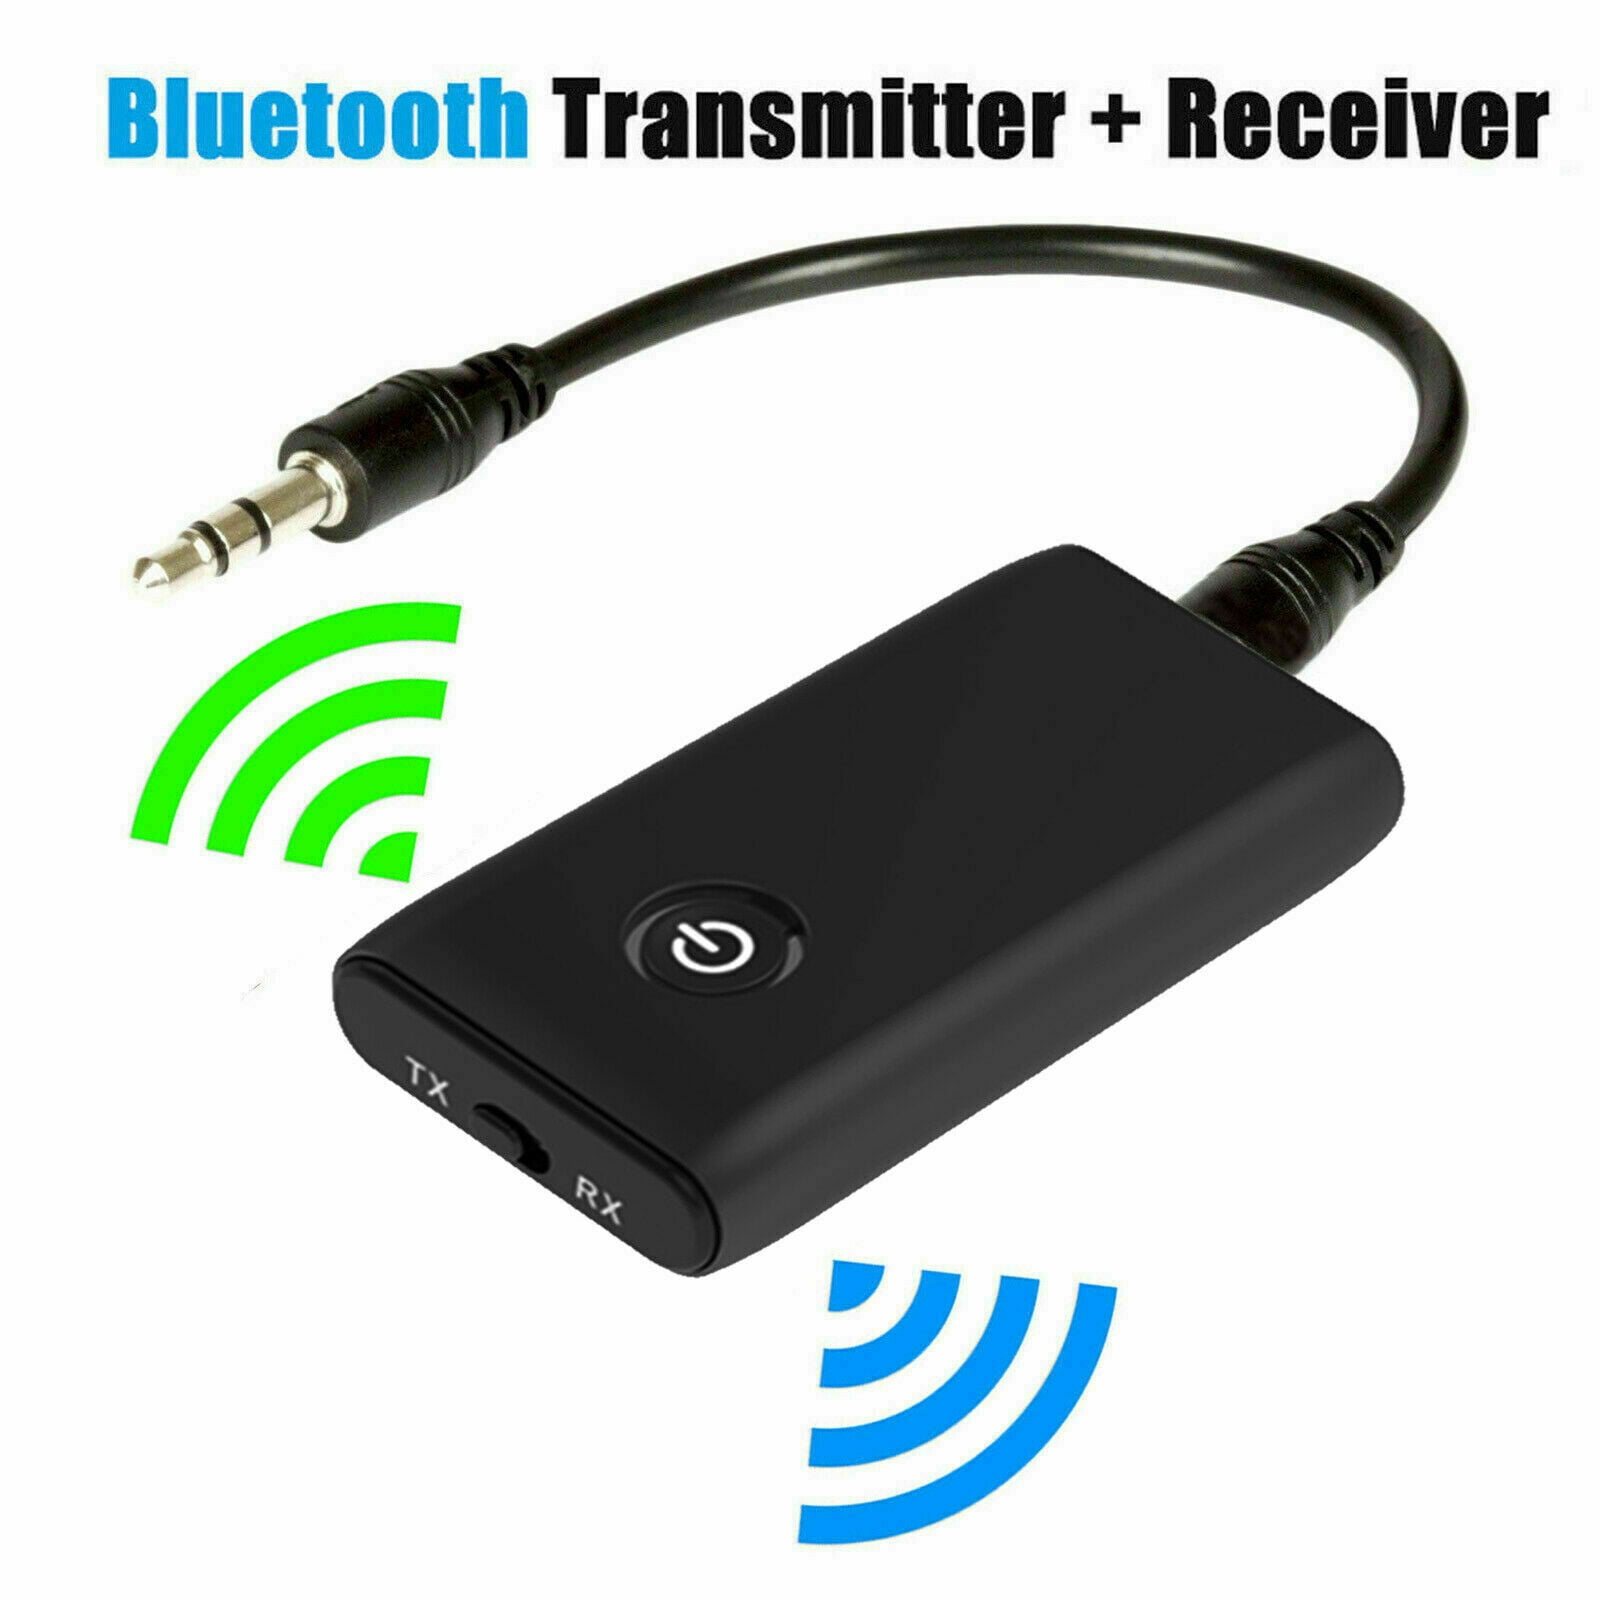 Noise Reduction LED Display Screen Bluetooth Transmitter Receiver 5.0 2 in 1 Bluetooth Adapter AUX 3.5mm Wireless Audio for TV/PC/Car/Home Sound System Low Latency